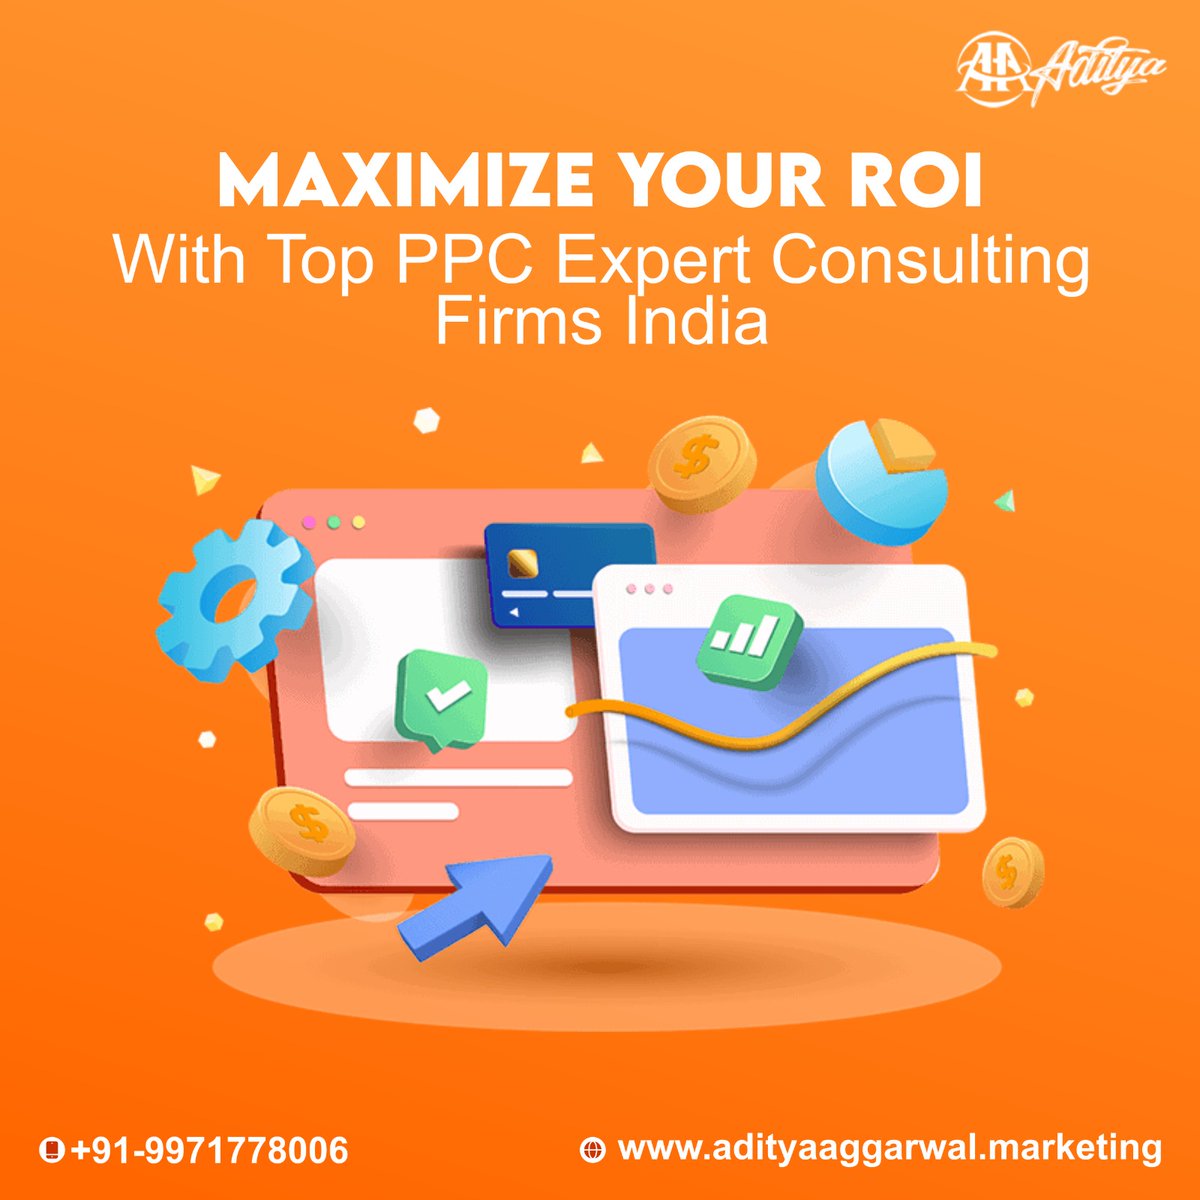 Maximize Your ROI With Top PPC Expert Consulting Firms India
#ppc #seo #digitalmarketing #marketing #socialmediamarketing #googleads #business #advertising #googleadwords #ppcexpert #ppcconsultant #adityaaggarwal